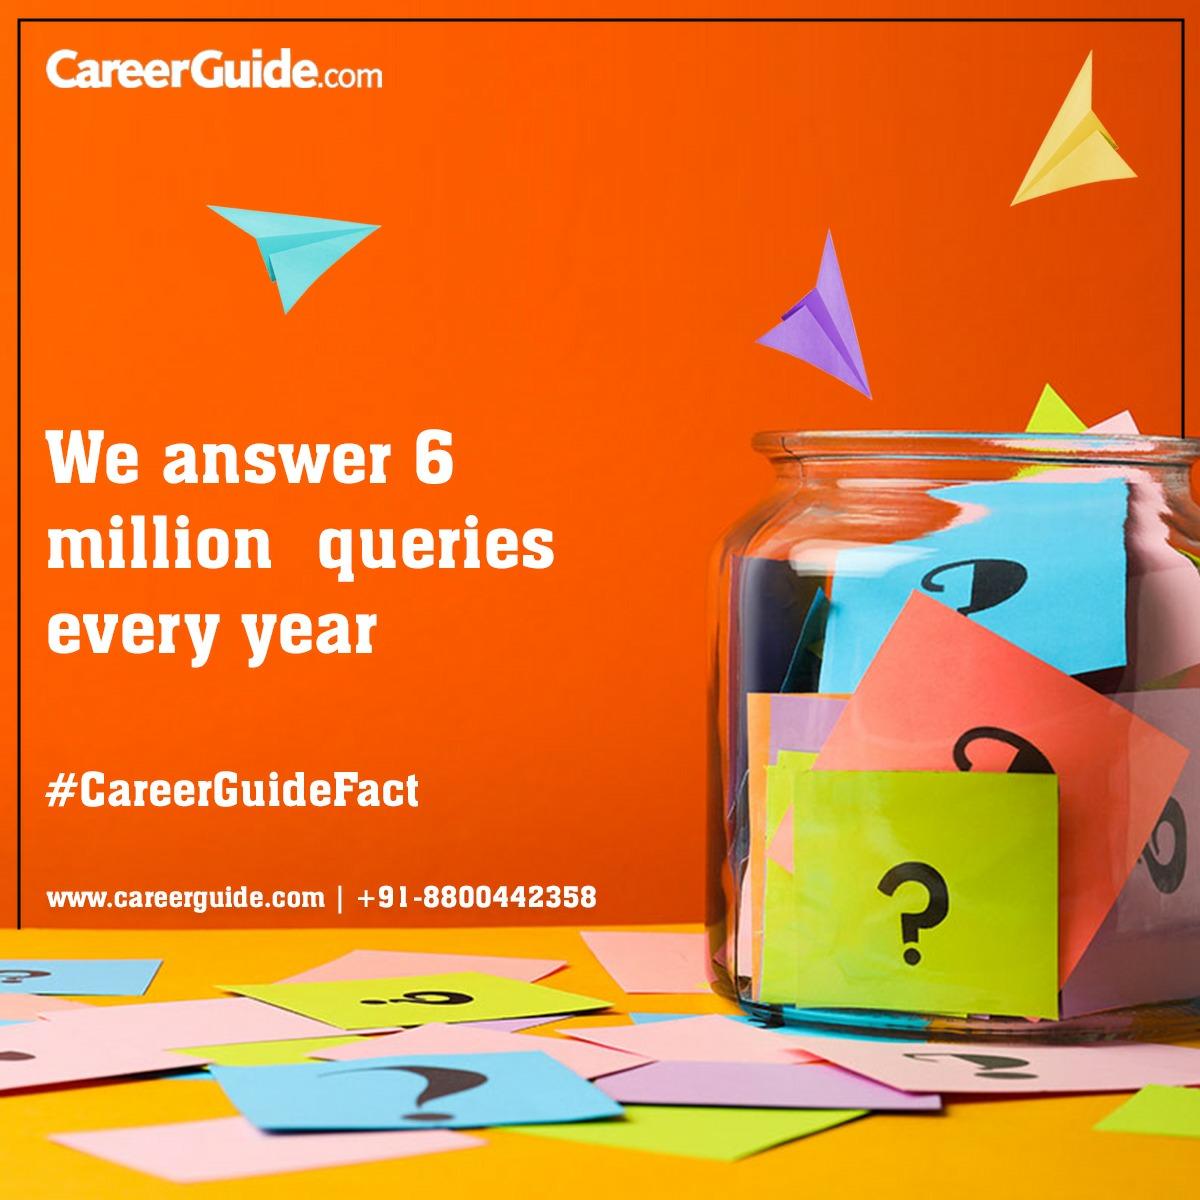 As a career counseling and guiding platform, we receive some 6 million queries ever year. Happy to answer them. 

#CareerGuide #CareerStats